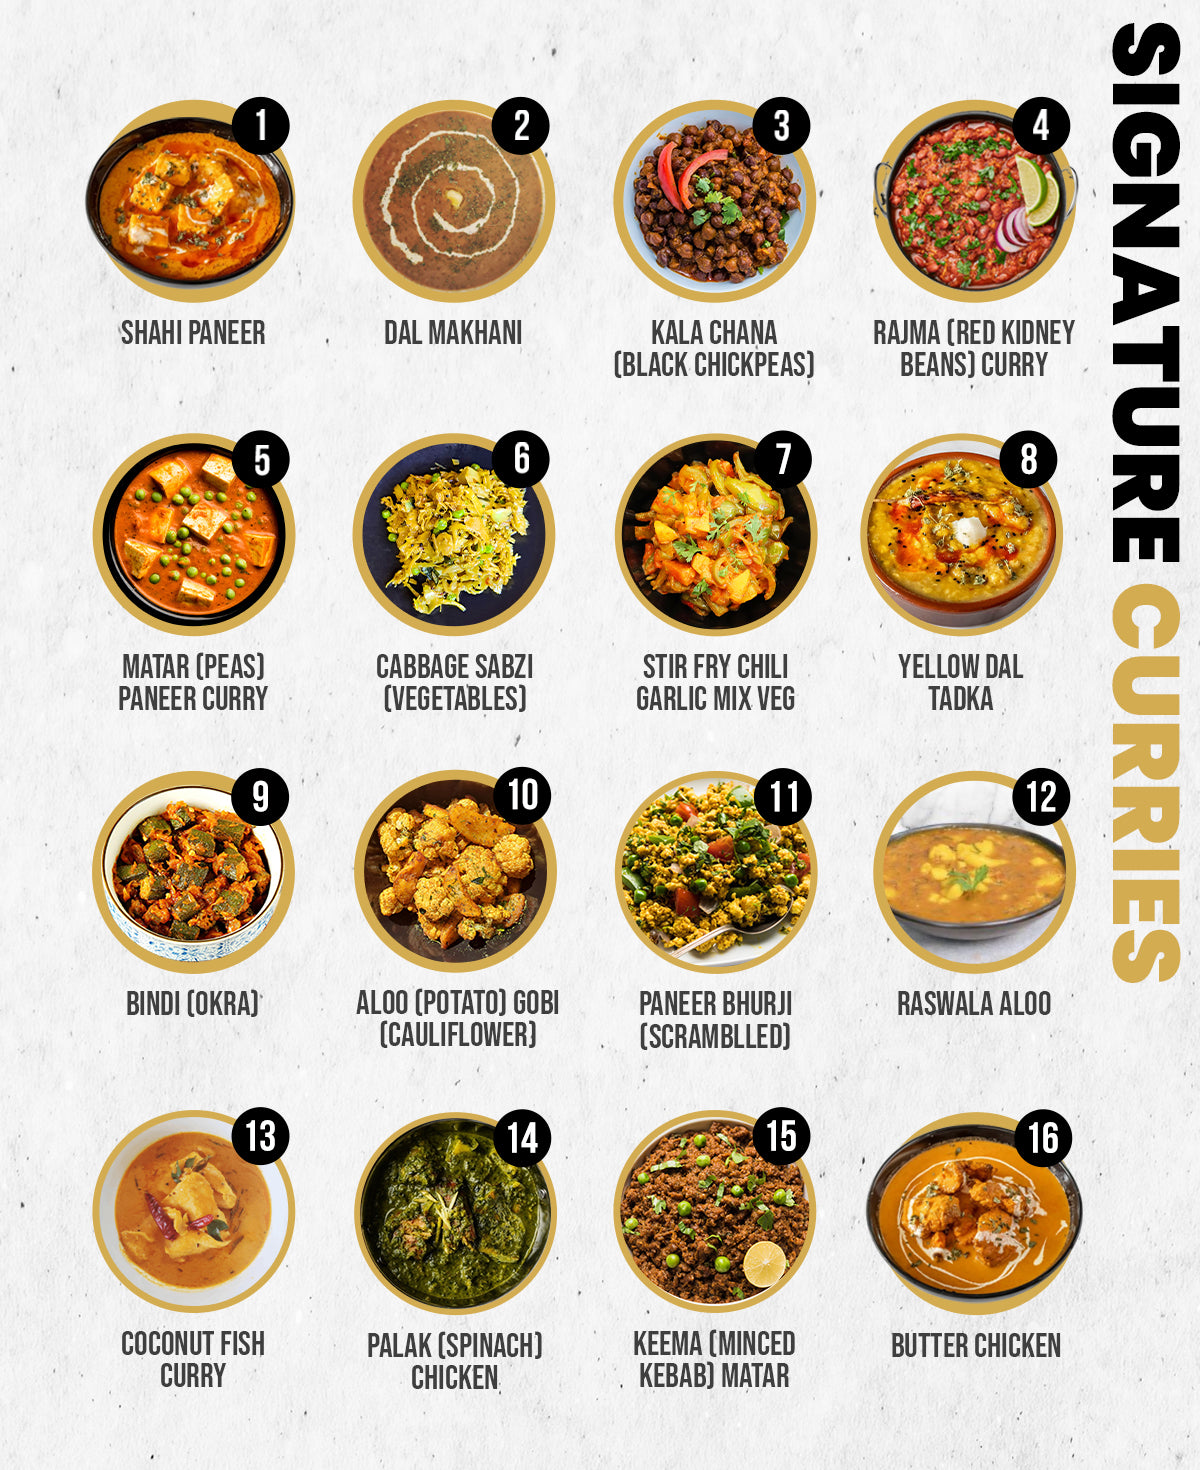 SIGNATURE CURRIES MIX & MATCH WEEKLY SUBSCRIPTION MEALS PLAN